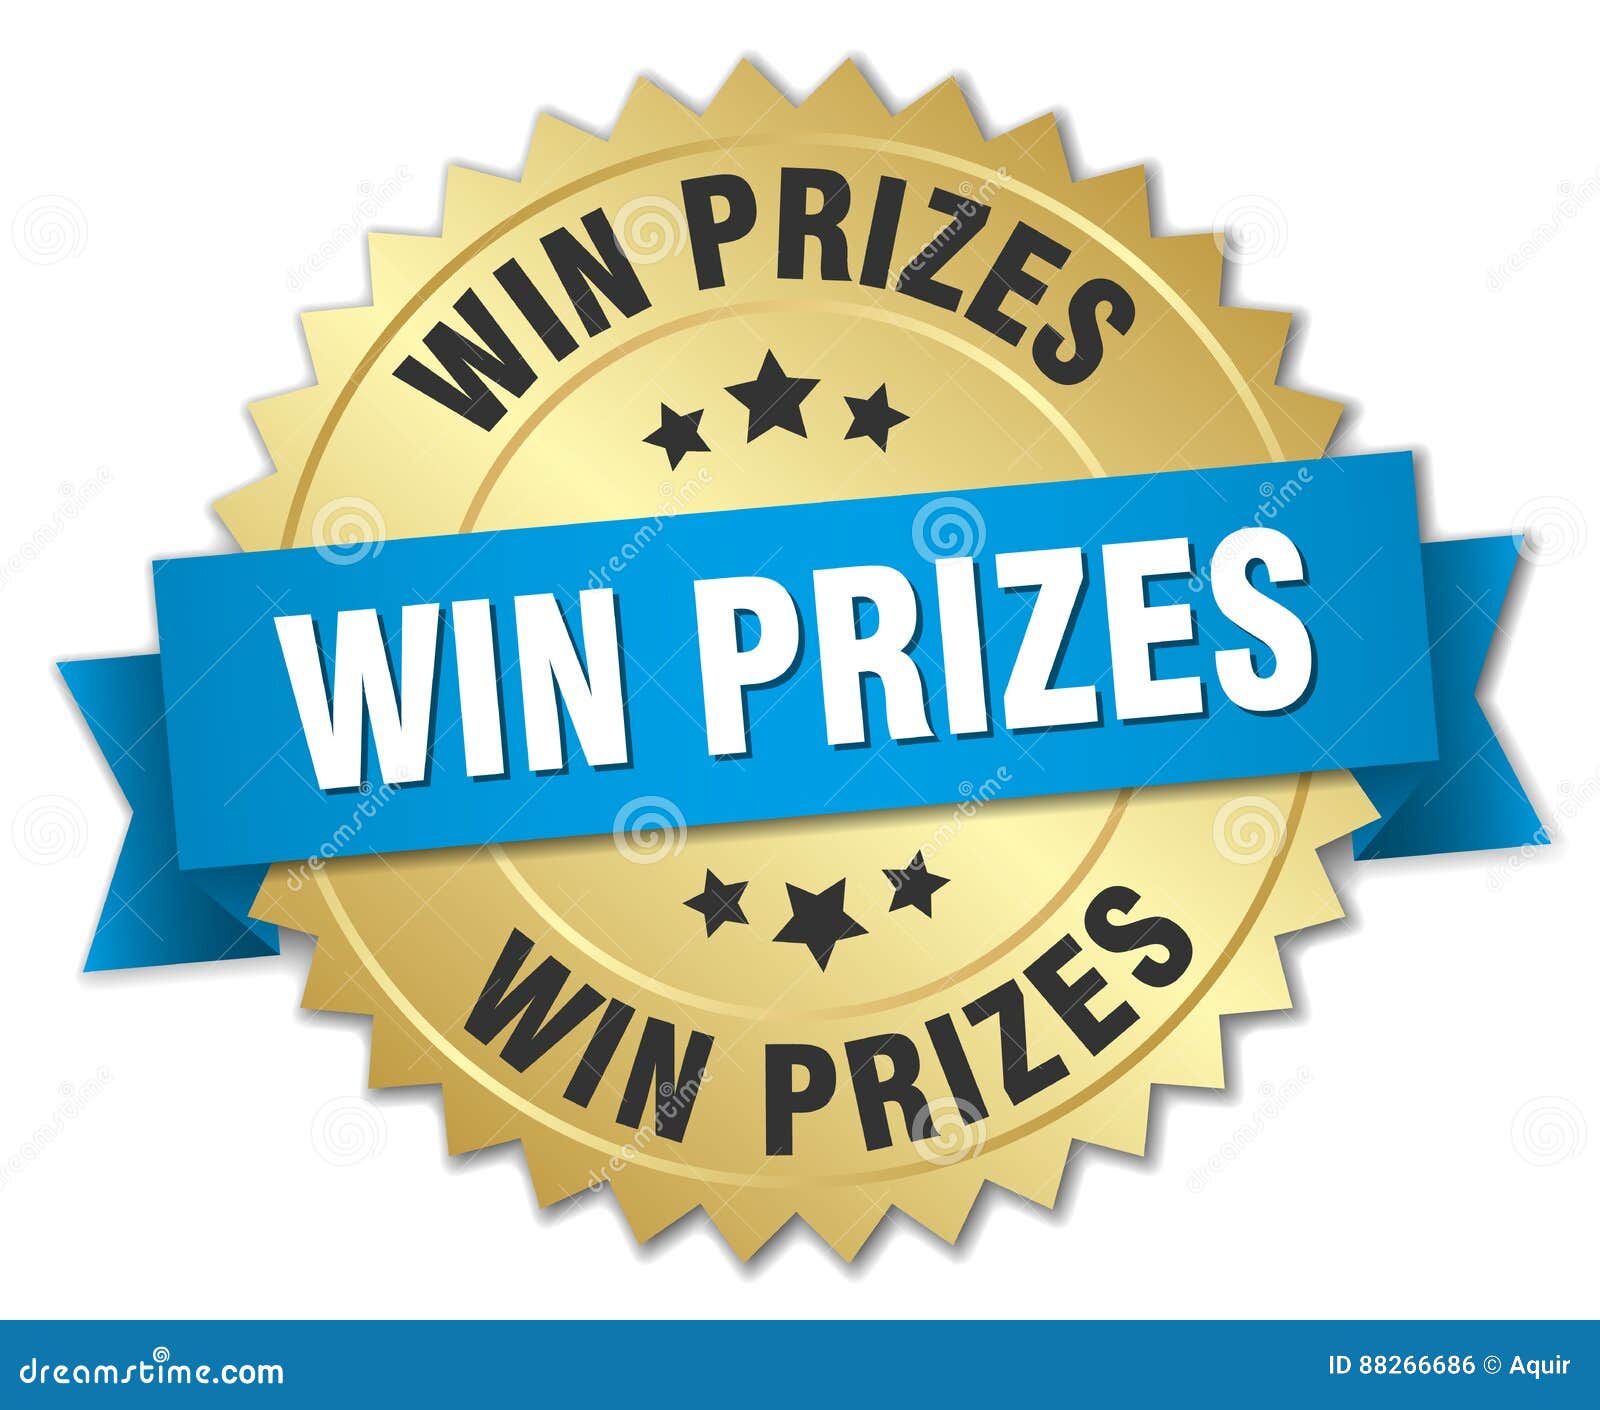 win prizes 3d gold badge